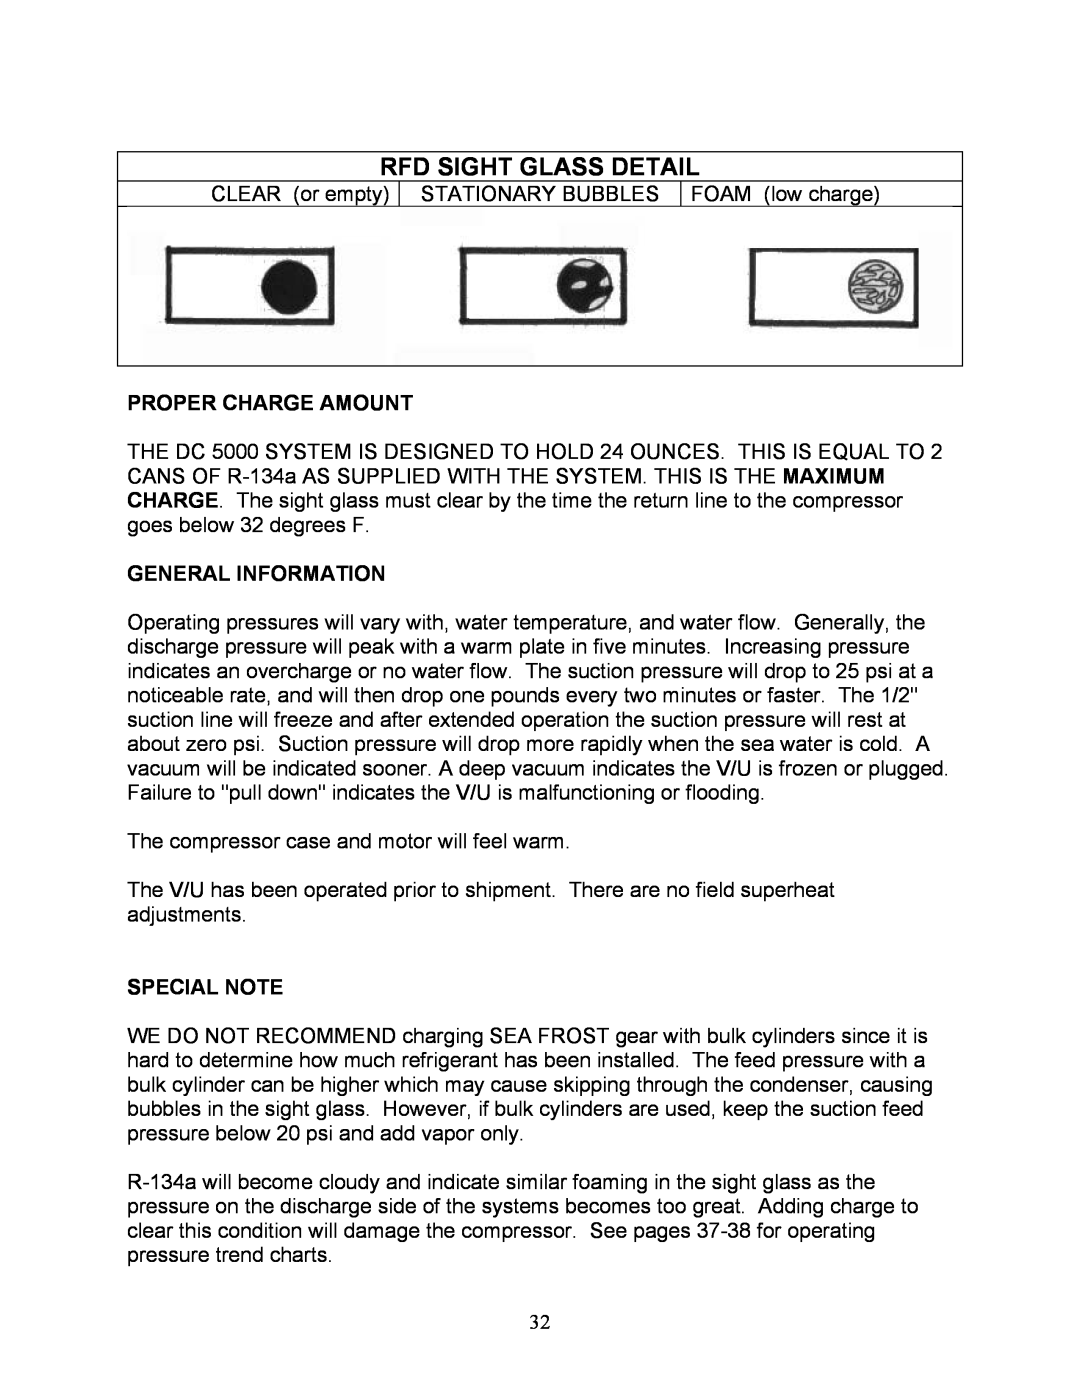 Sea Frost DC 5000 installation instructions Rfd Sight Glass Detail, Proper Charge Amount, General Information, Special Note 